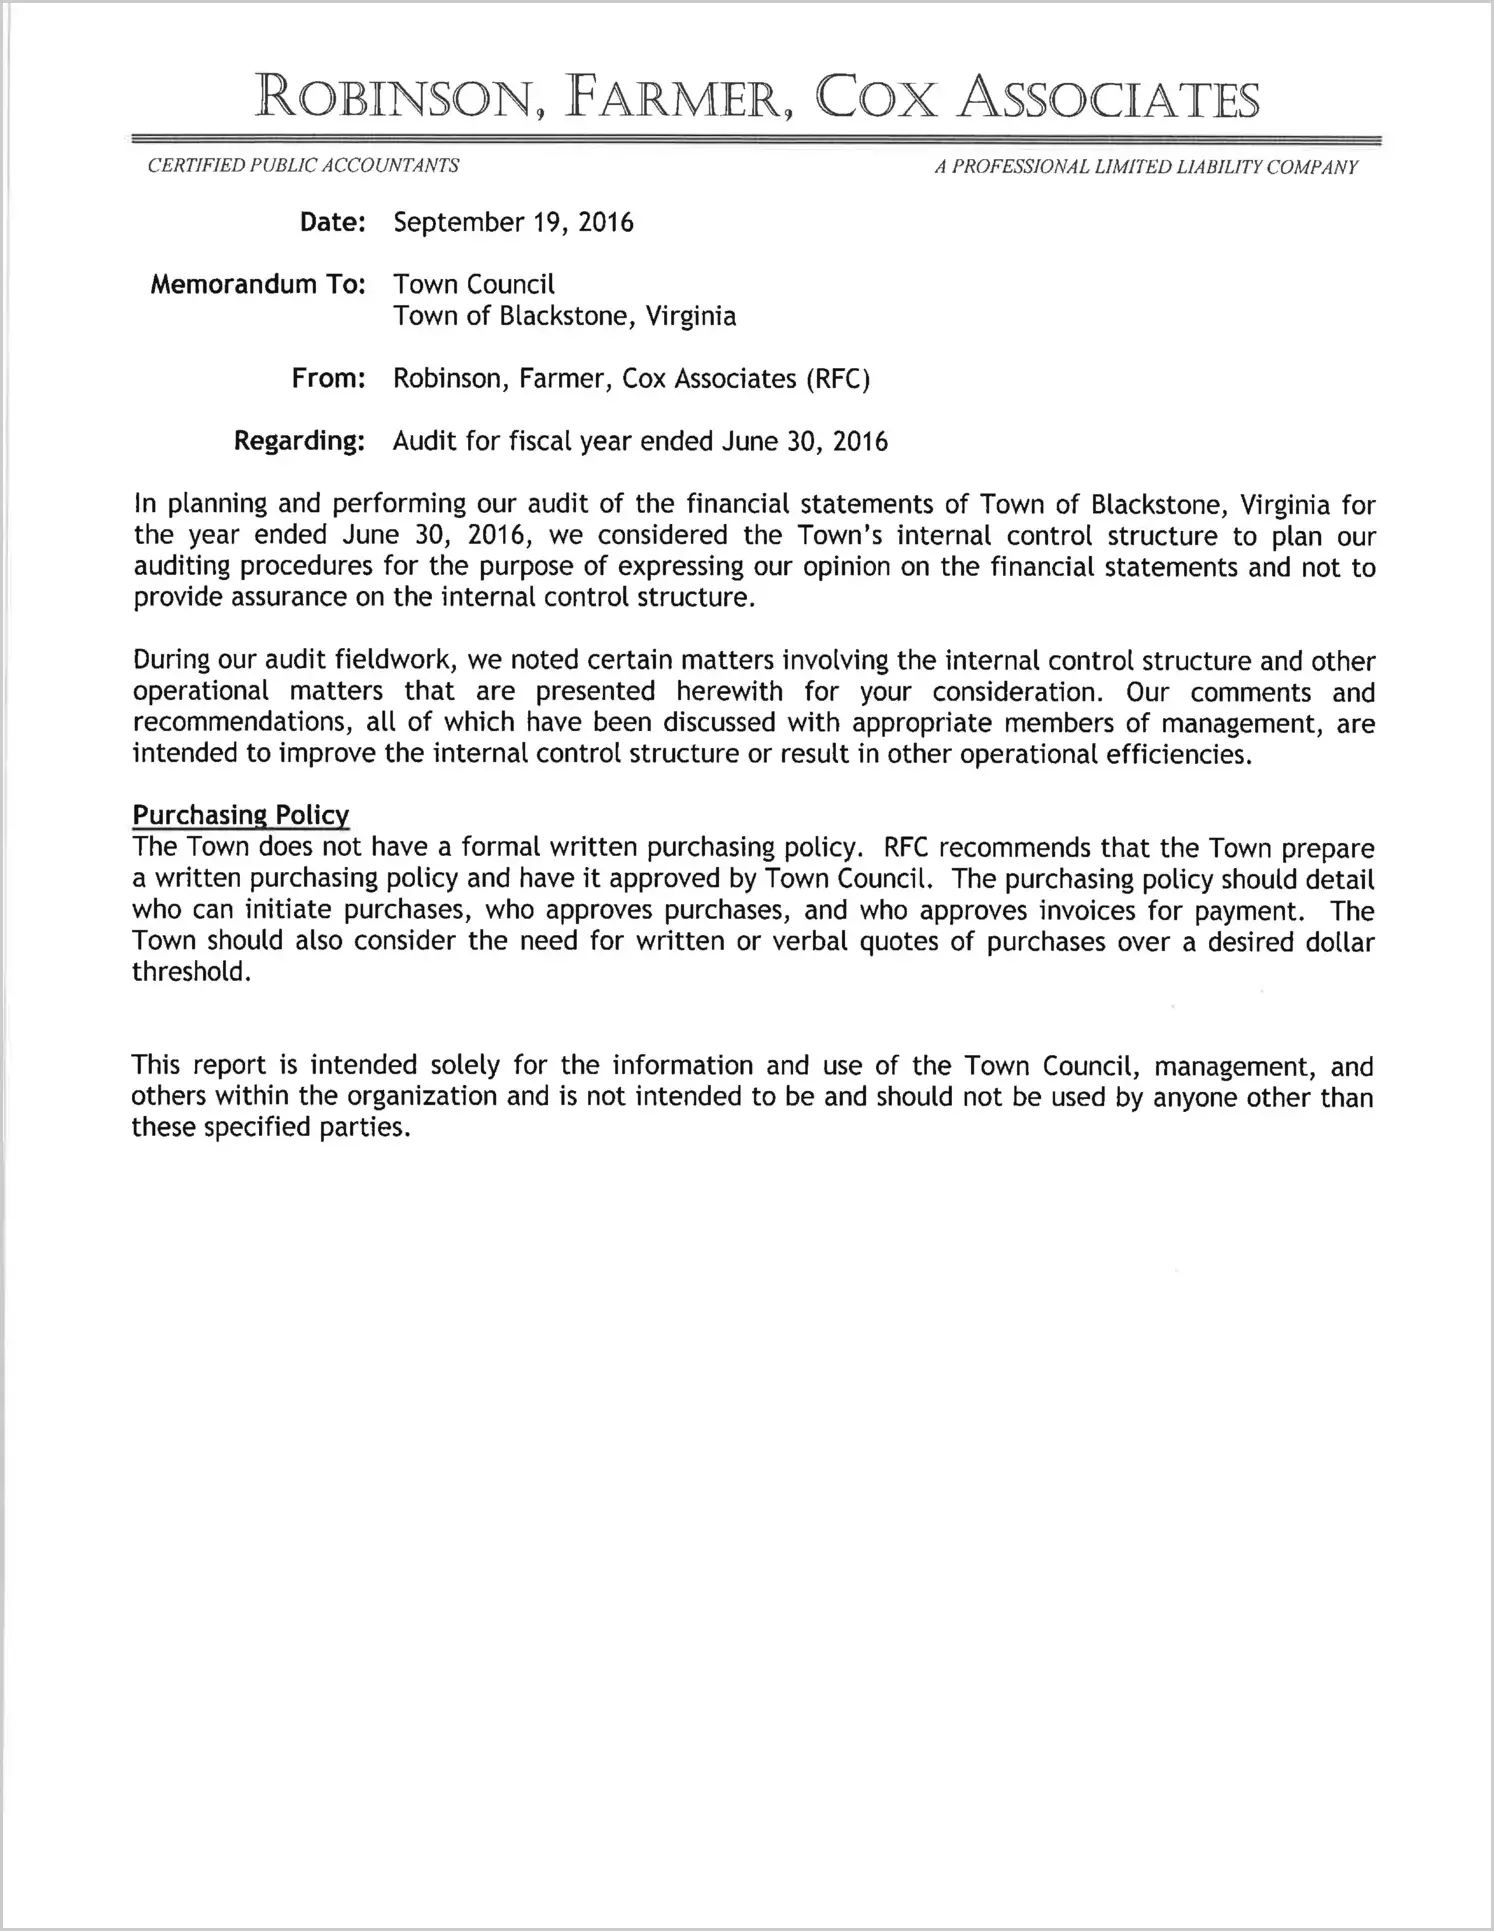 2016 Management Letter for Town of Blackstone